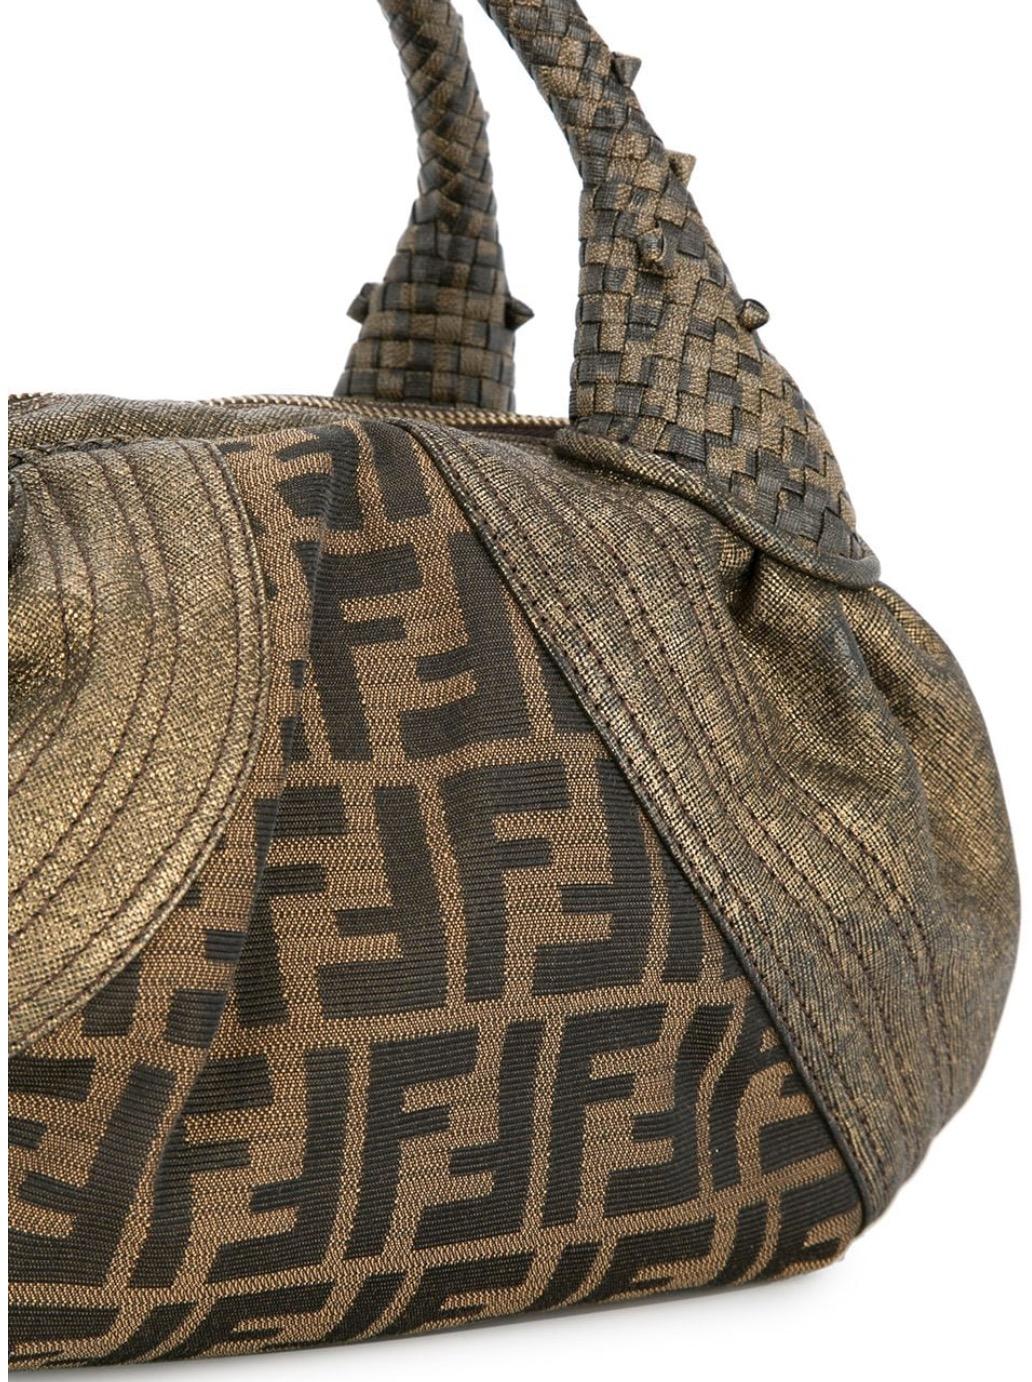 Fendi Monogram Fabric Brown Gold Leather Top Handle Satchel Small Mini Spy Bag In Excellent Condition For Sale In Chicago, IL